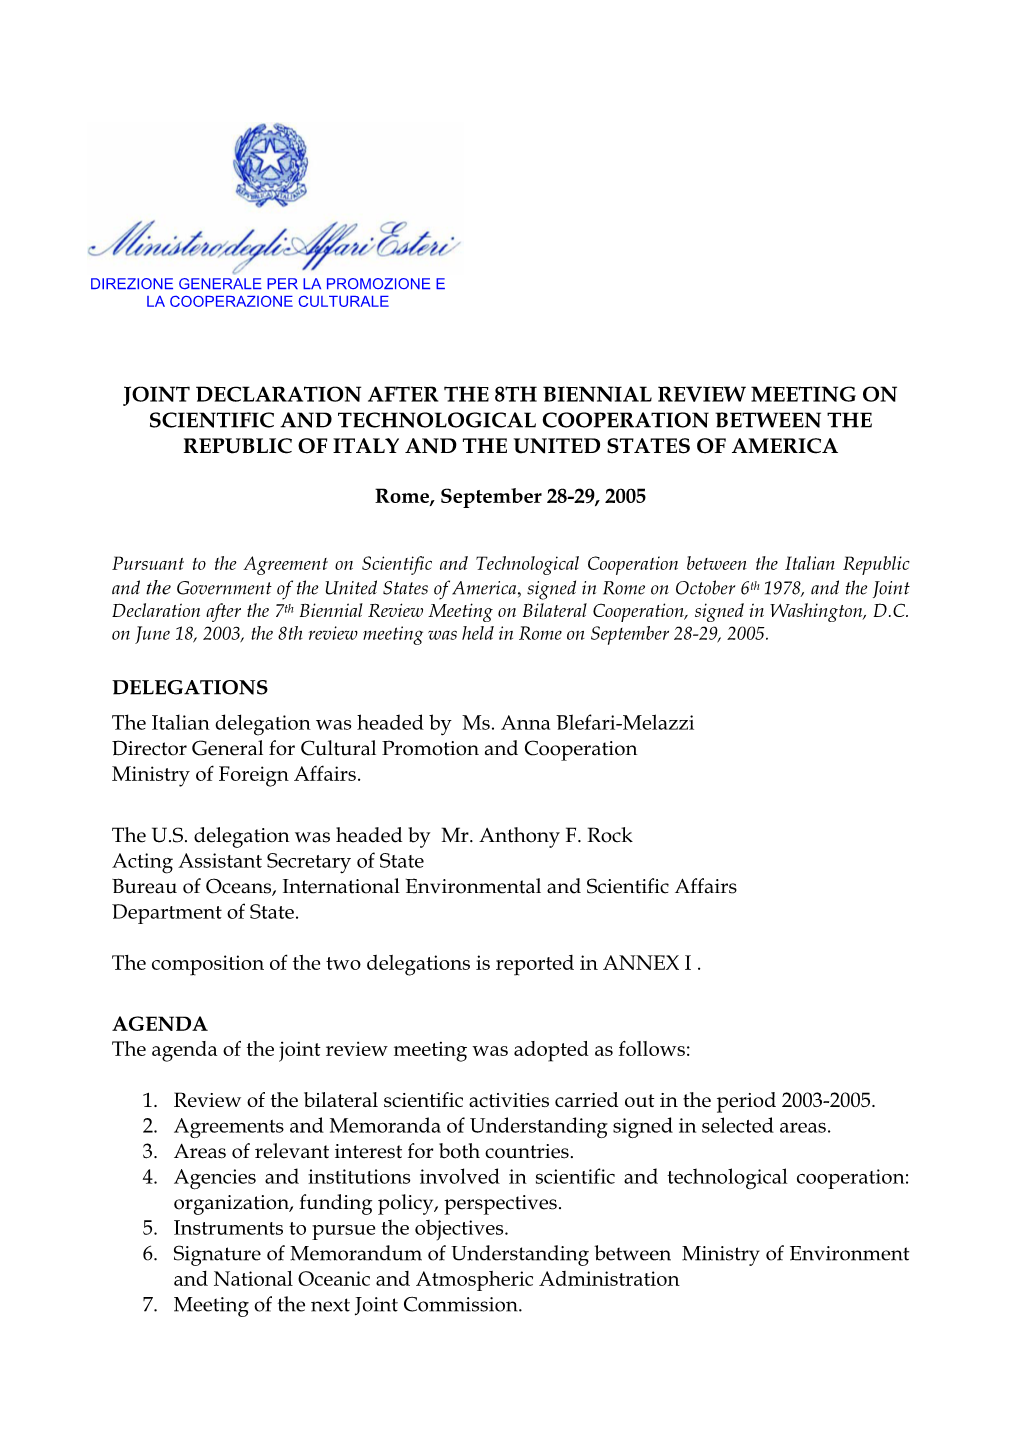 Joint Declaration After the Biennial Review Meeting On